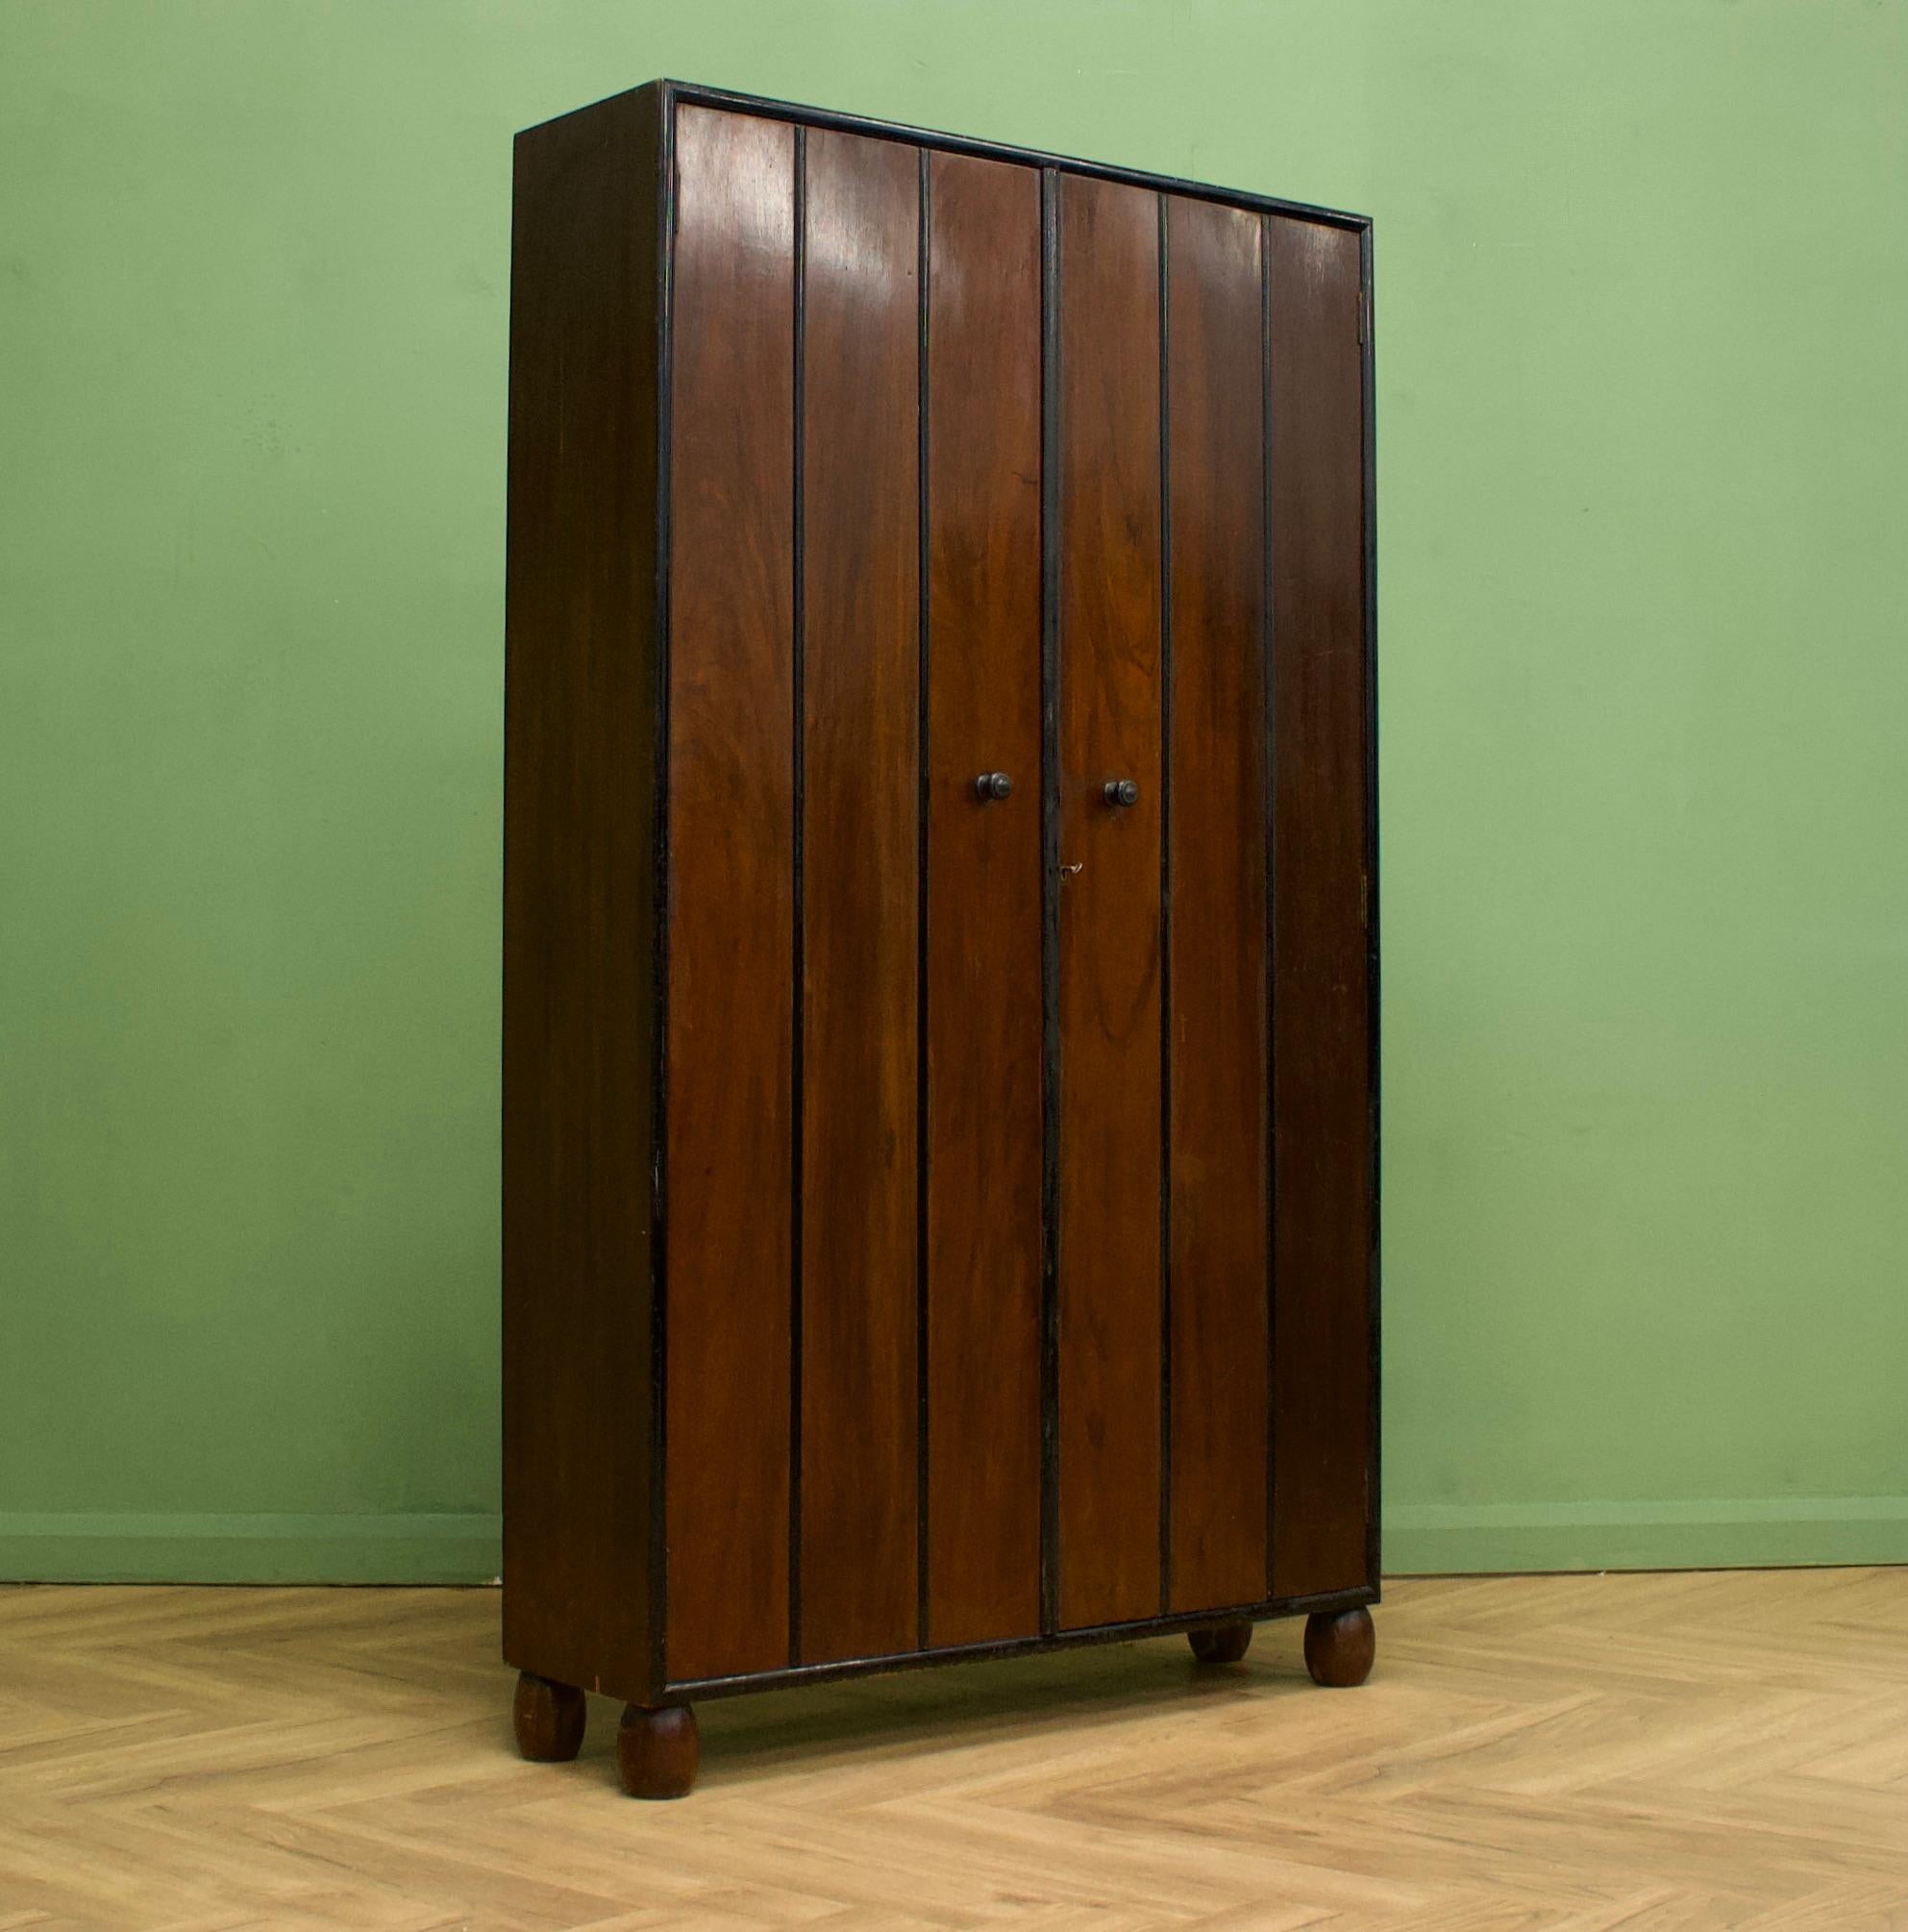 A beautiful quality Art Deco mahogany hanging wardrobe from Heals, circa 1930s (unmarked but features in Heals Middle Class Furnishing Catalogue by David & Charles p 50 no 633)


The narrow width makes it a perfect hall cupboard as it features